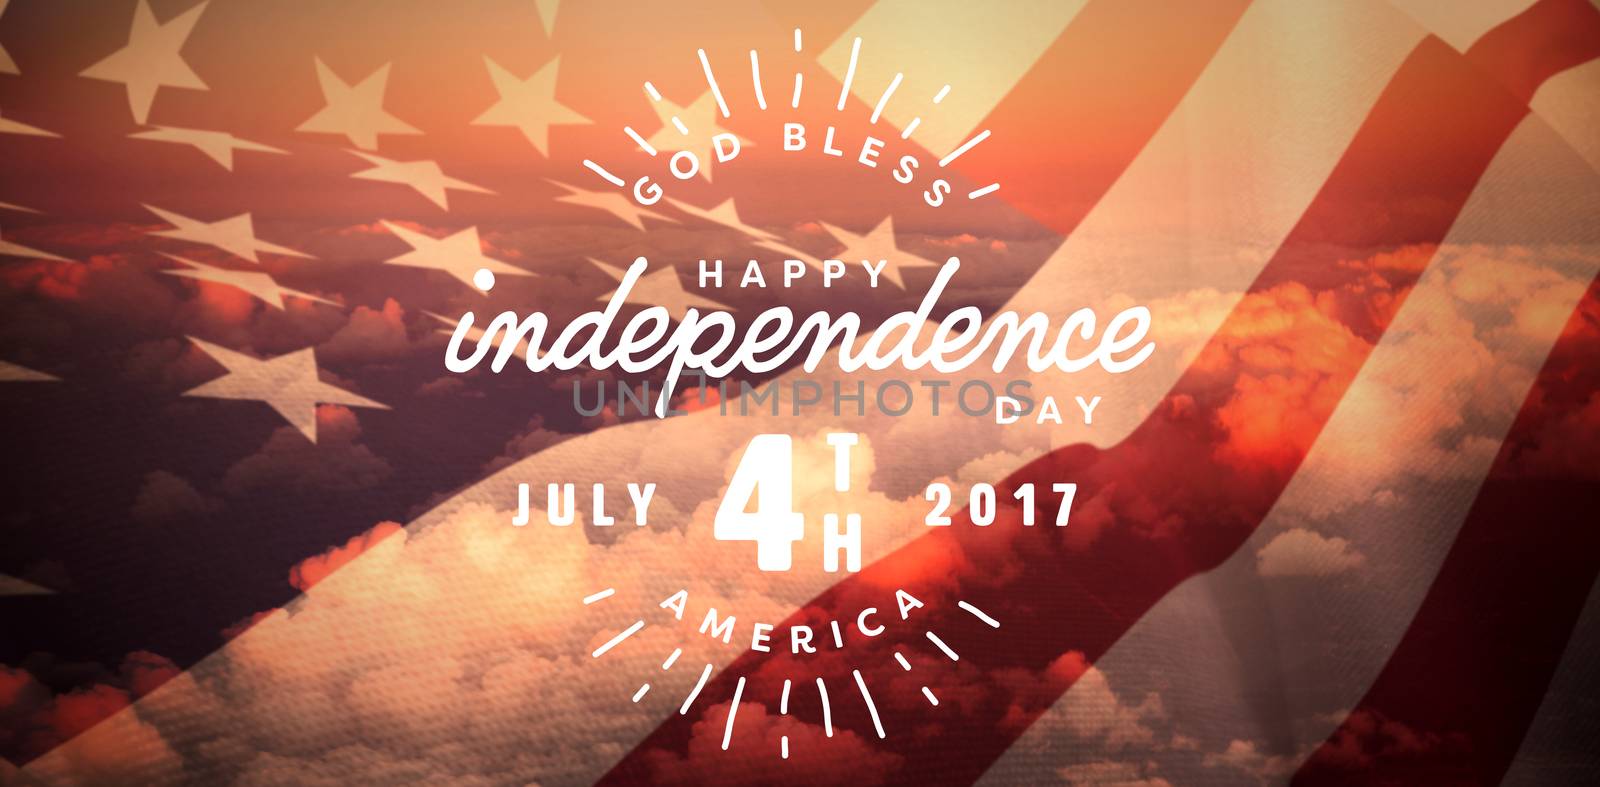 Digitally generated image of happy 4th of july text against full frame image of cloudy sky